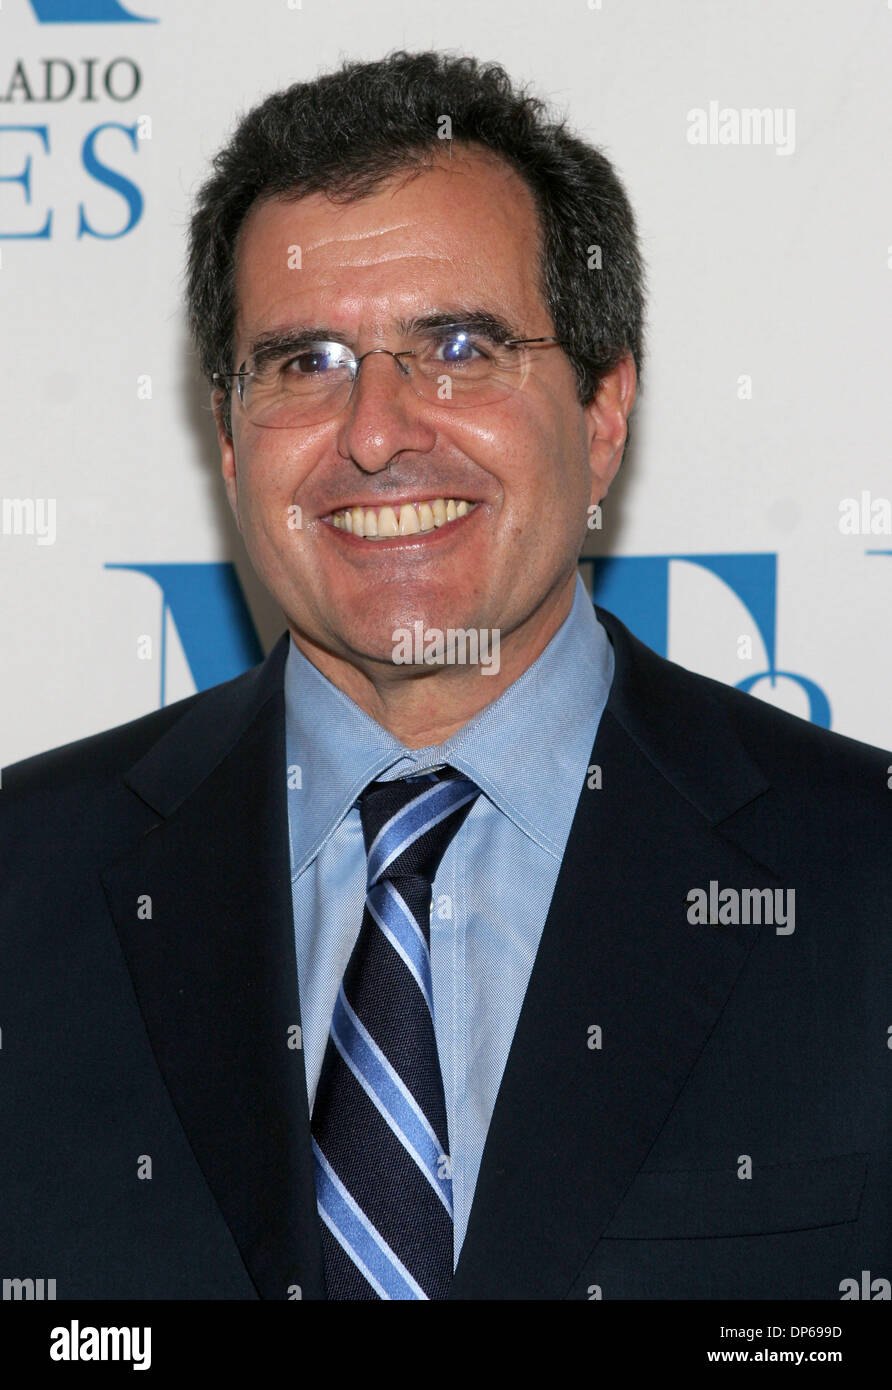 Oct 10, 2006; Beverly Hills, CA, USA; PETER CHERNIN from FOX arrives at the Museum of Television and Radio special anniversary celebration. Mandatory Credit: Photo by Marianna Day Massey/ZUMA Press. (©) Copyright 2006 by Marianna Day Massey Stock Photo